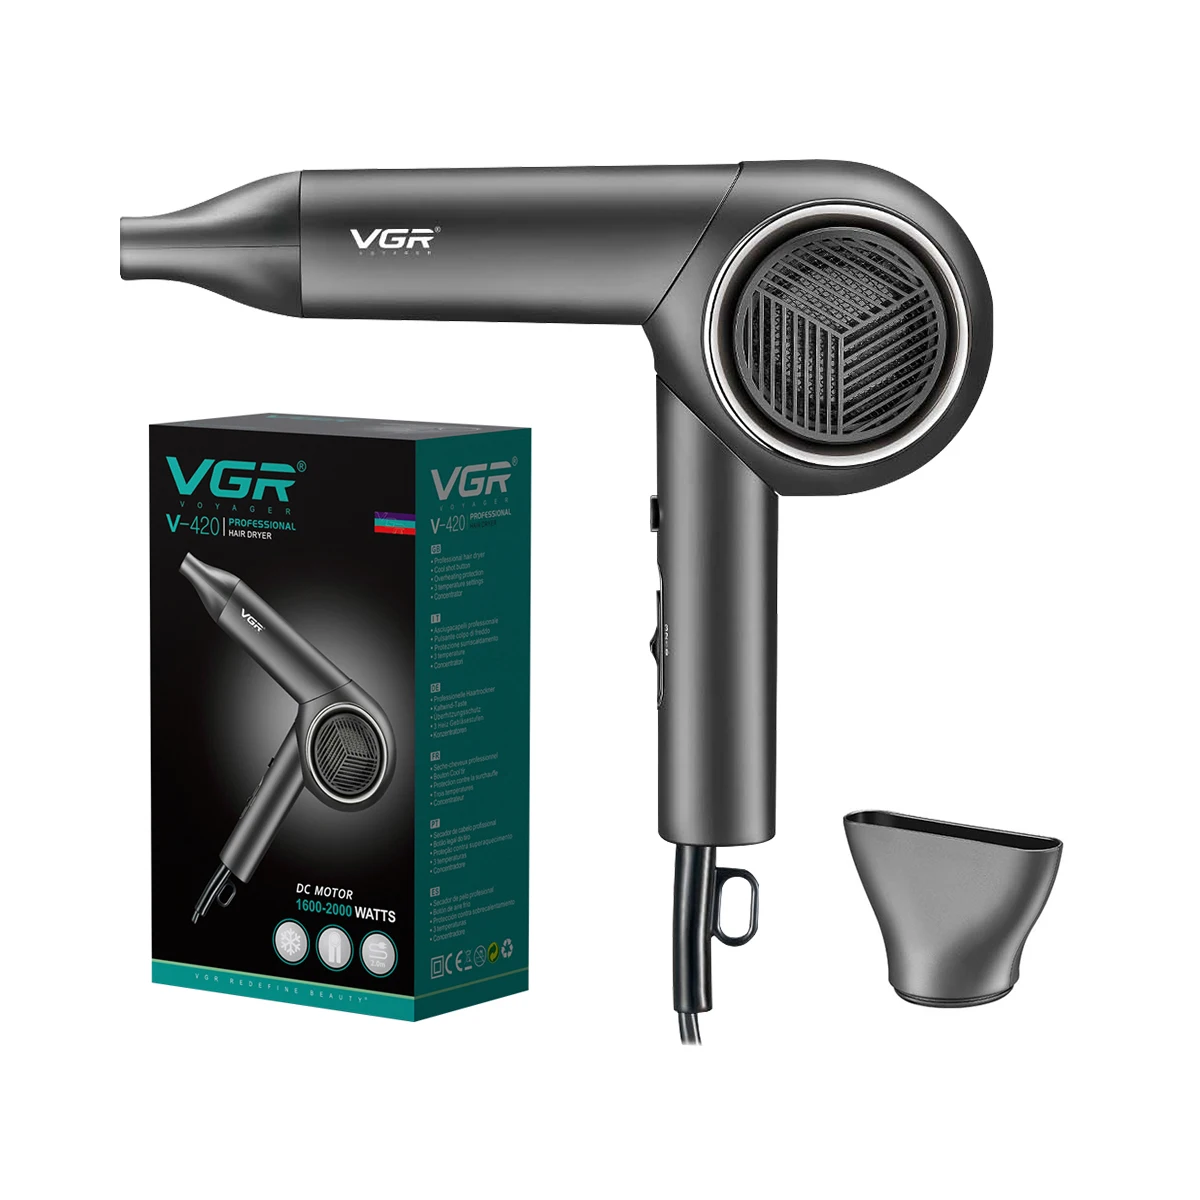 

VGR V-420 1600-2000W Powerful Foldable Electric Professional Travel Hair Dryer with Concentrator